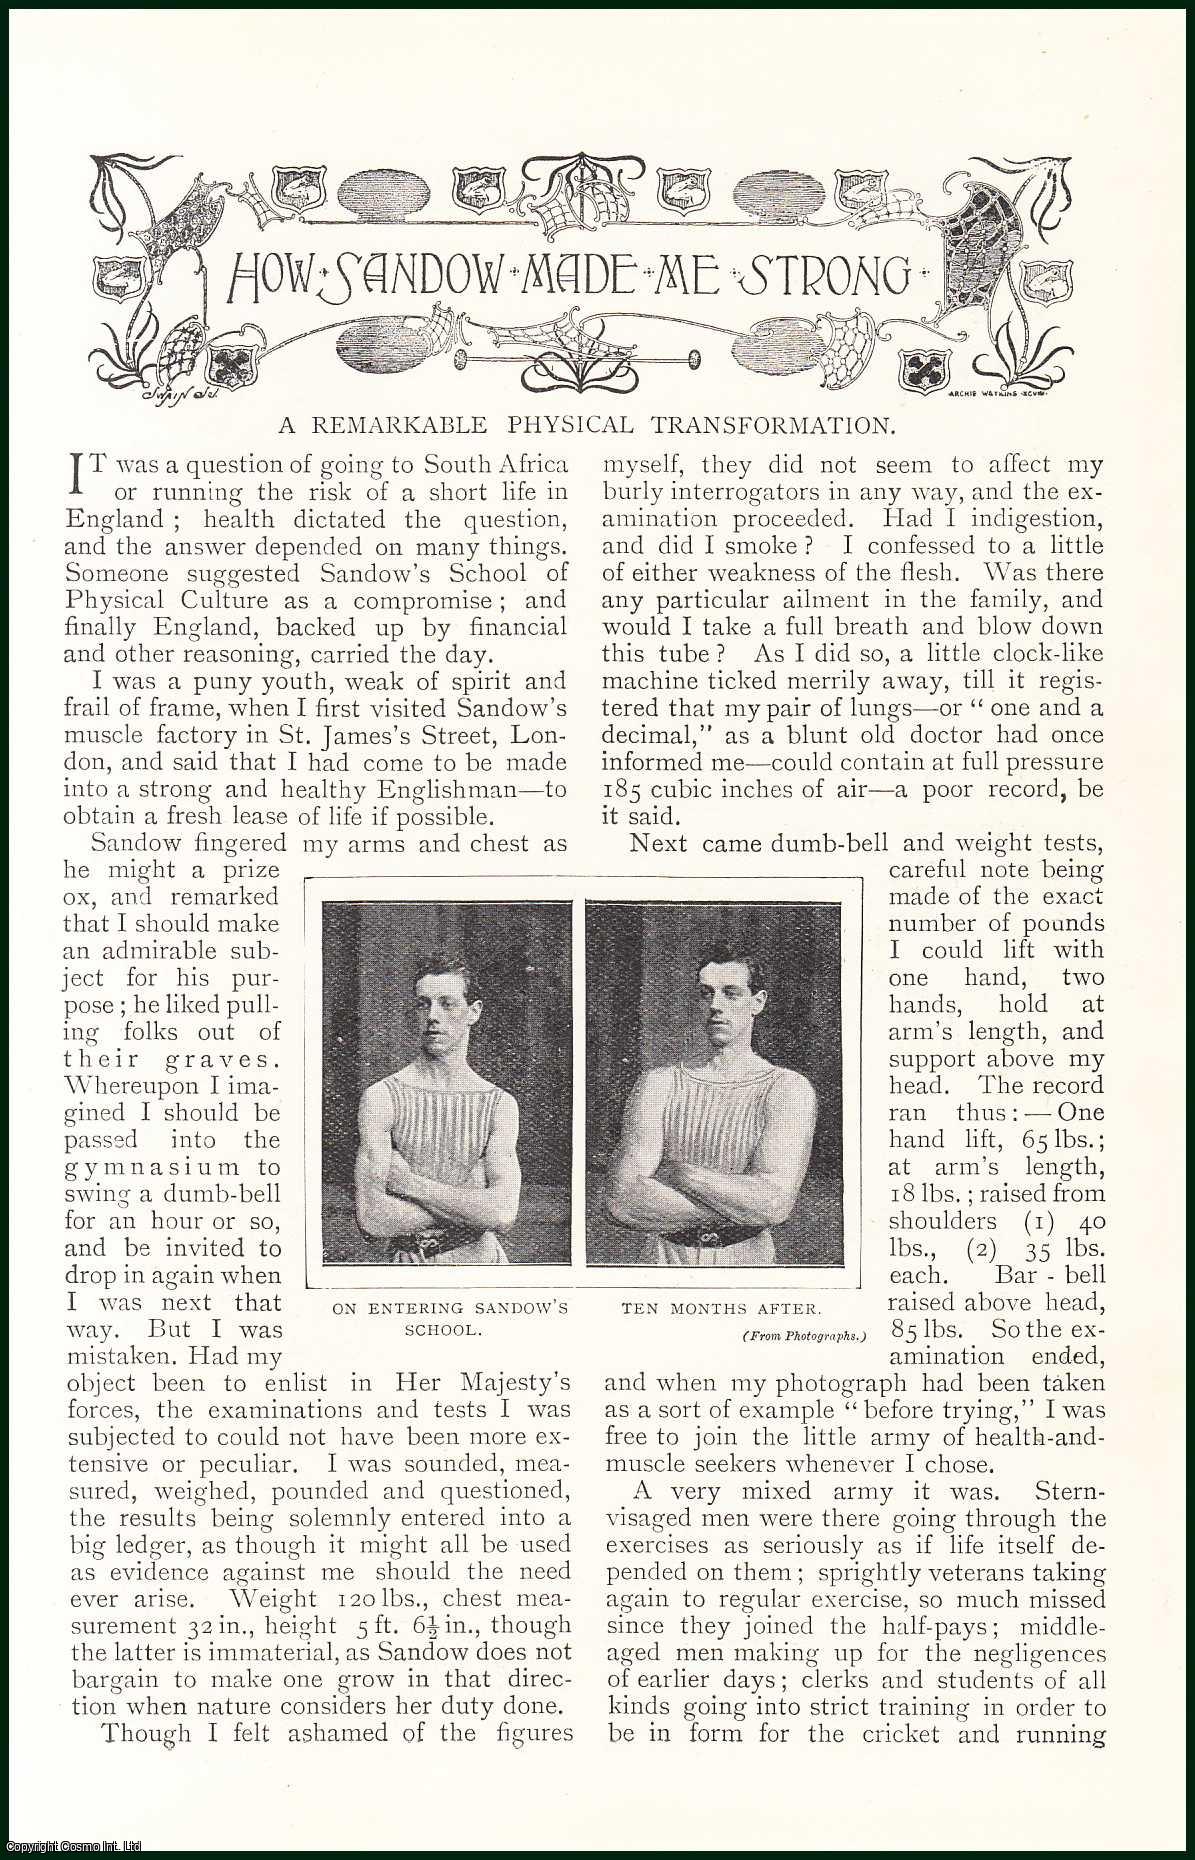 A.E.J. - How Sandow Made Me Strong : Sandow's School of Physical Culture, St. James Street London. An uncommon original article from the Harmsworth London Magazine, 1898.